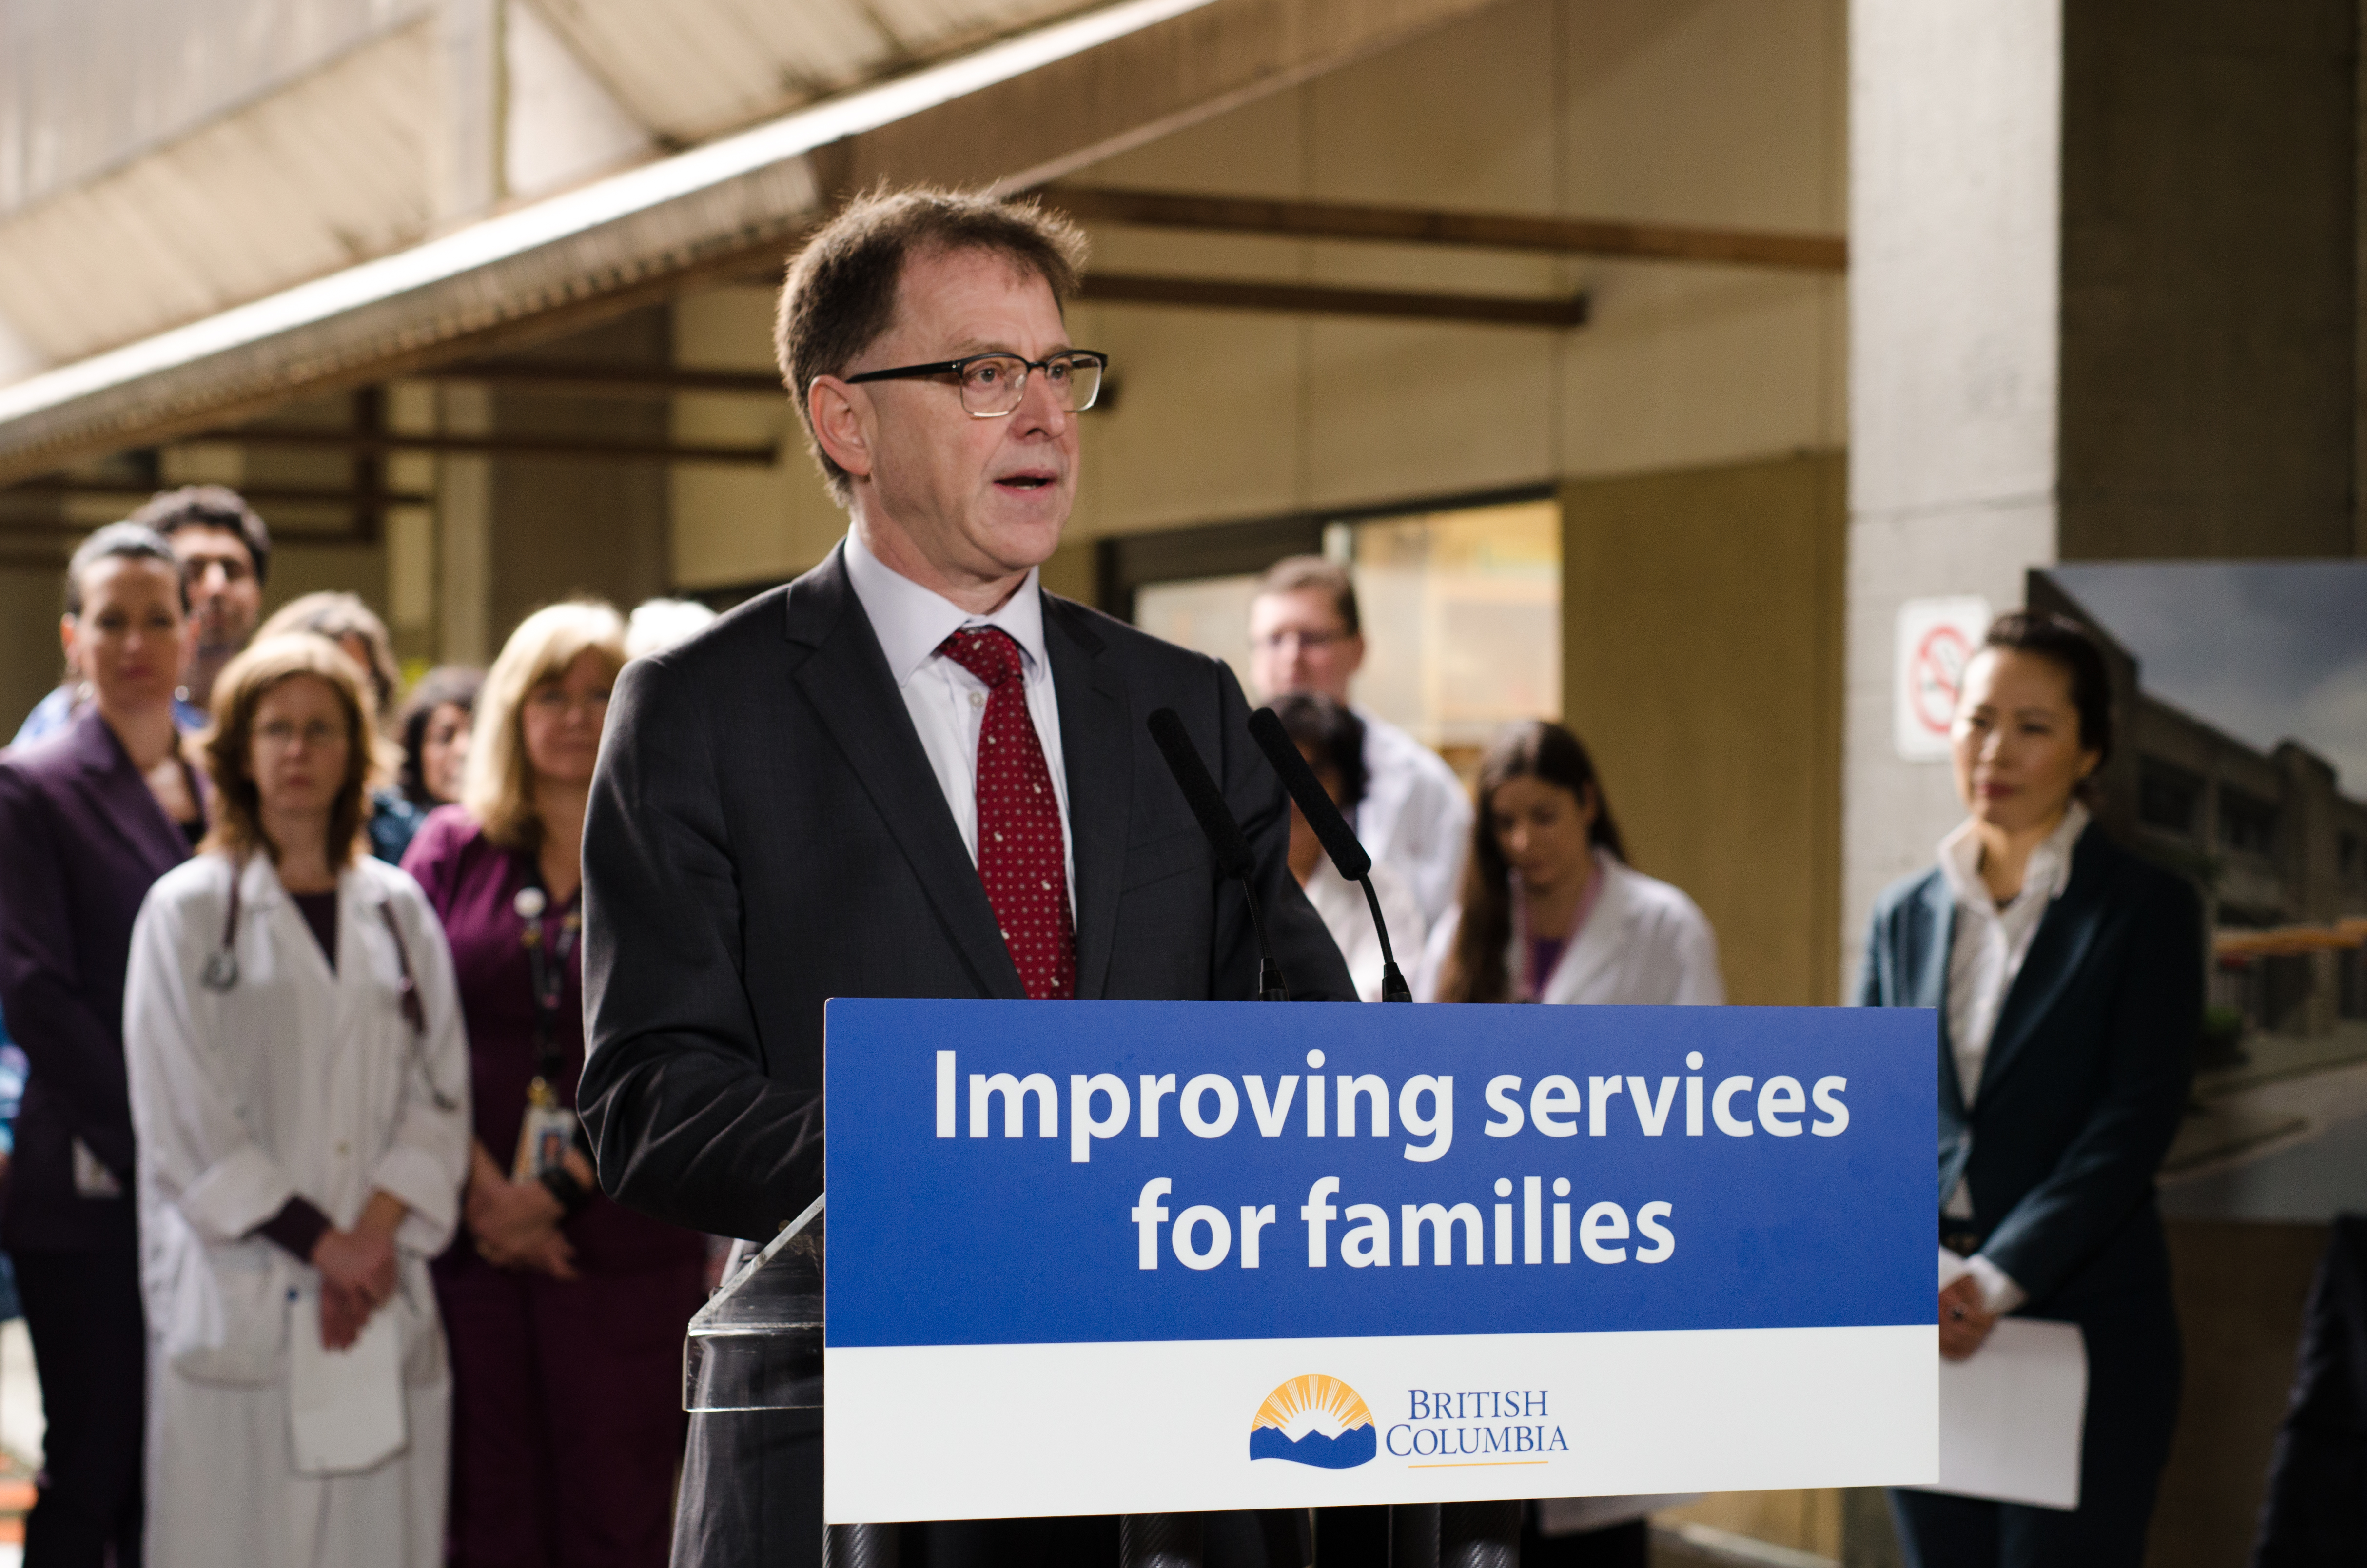 British Columbia’s Minister of Health, the Honourable Adrian Dix, announces commitment of $27.6 million towards Eagle Ridge Hospital’s emergency department expansion.